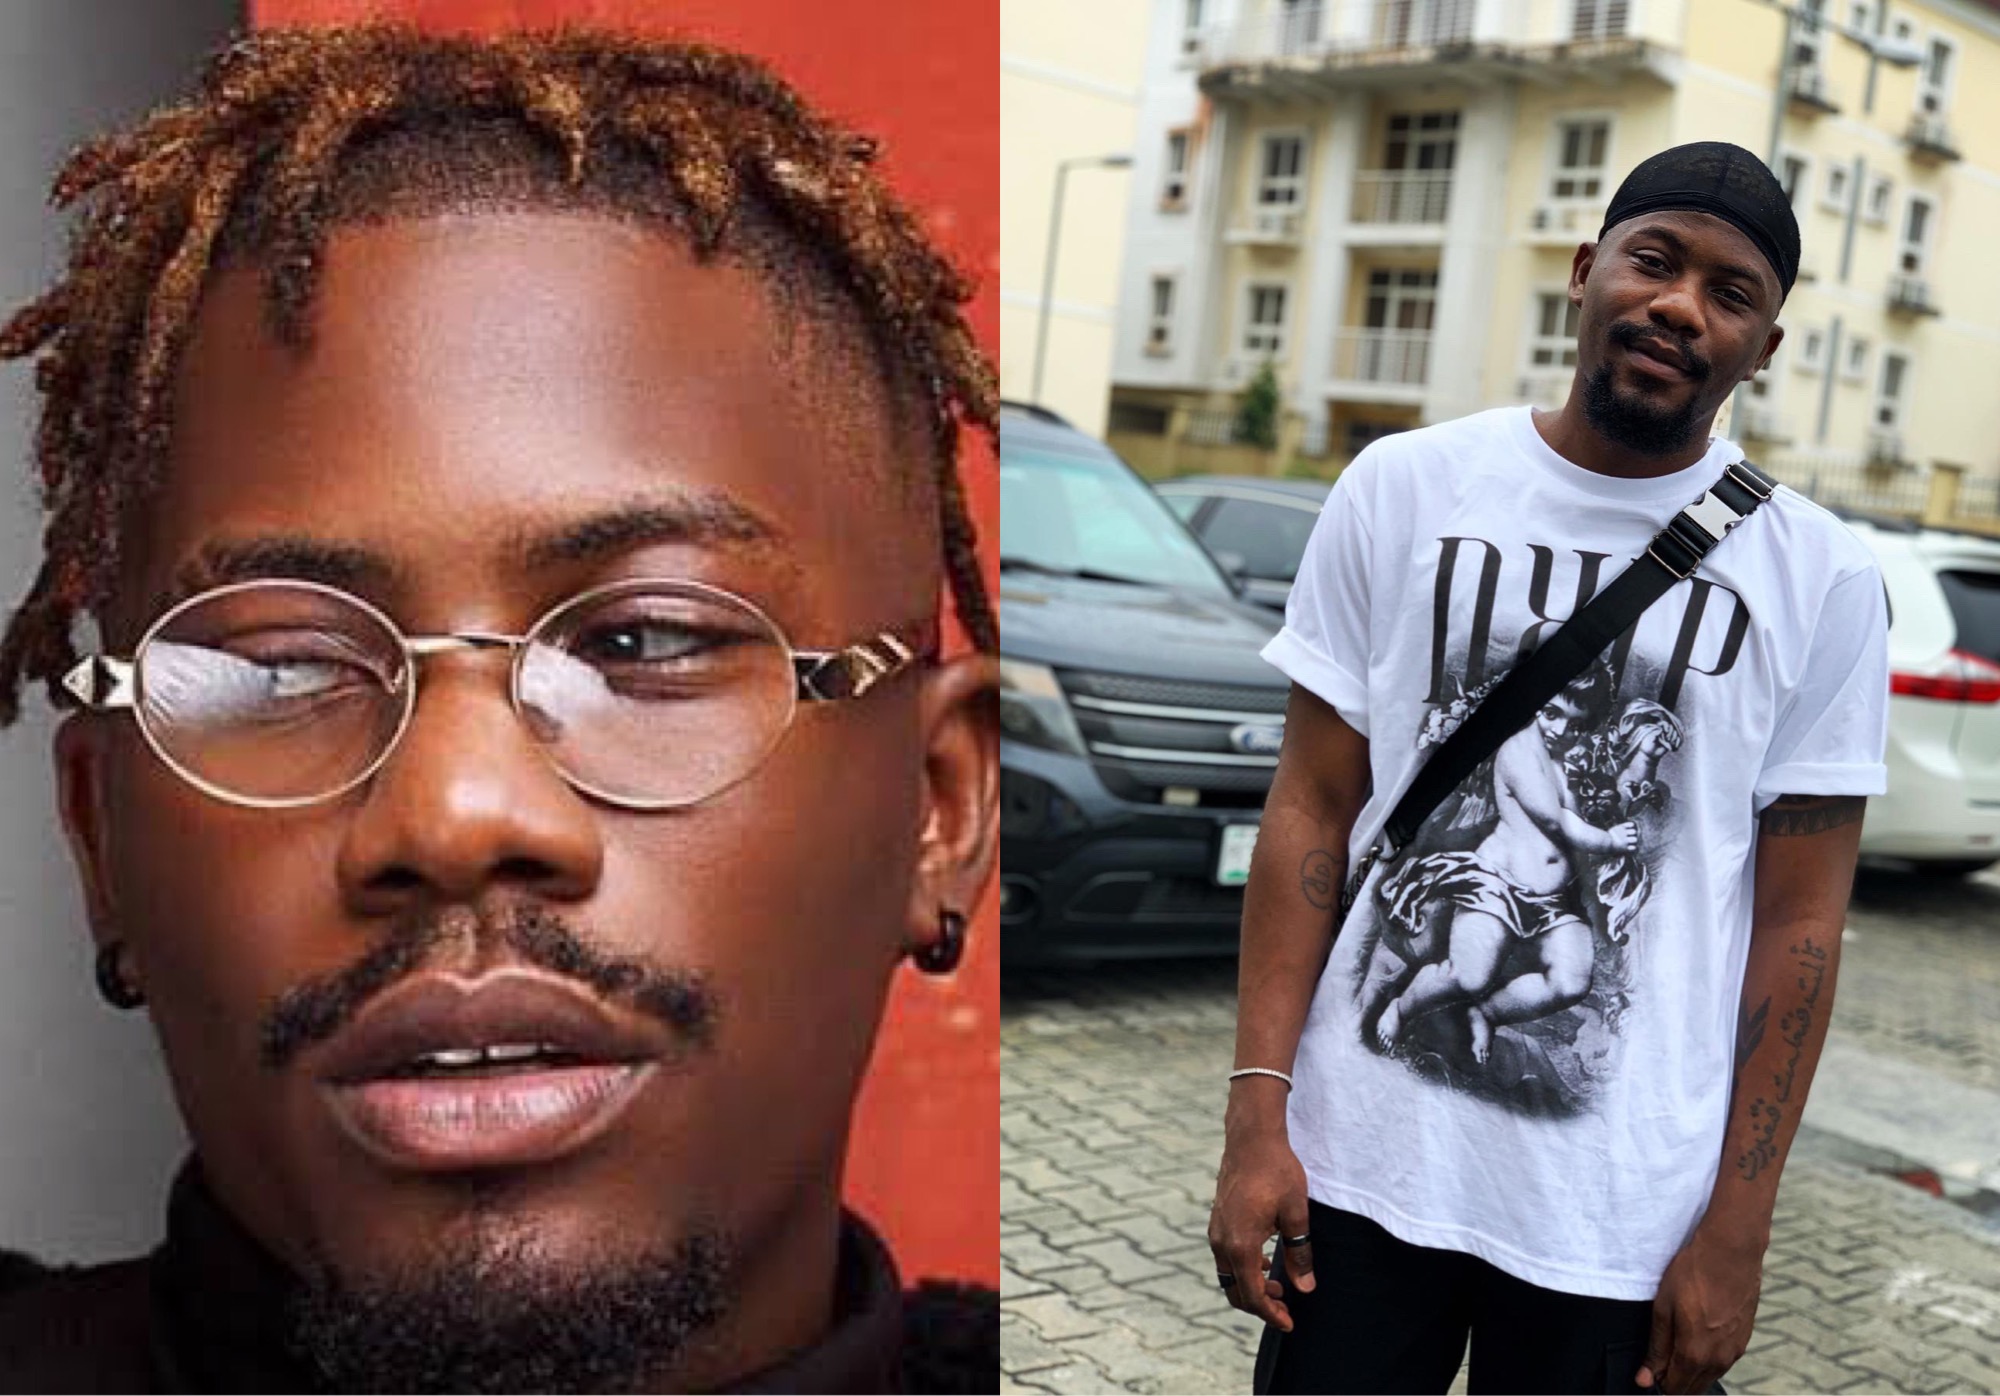 “Love Doesn’t Exist In Nigeria, Everyone Now Belongs To The Streets” - Rapper Ycee